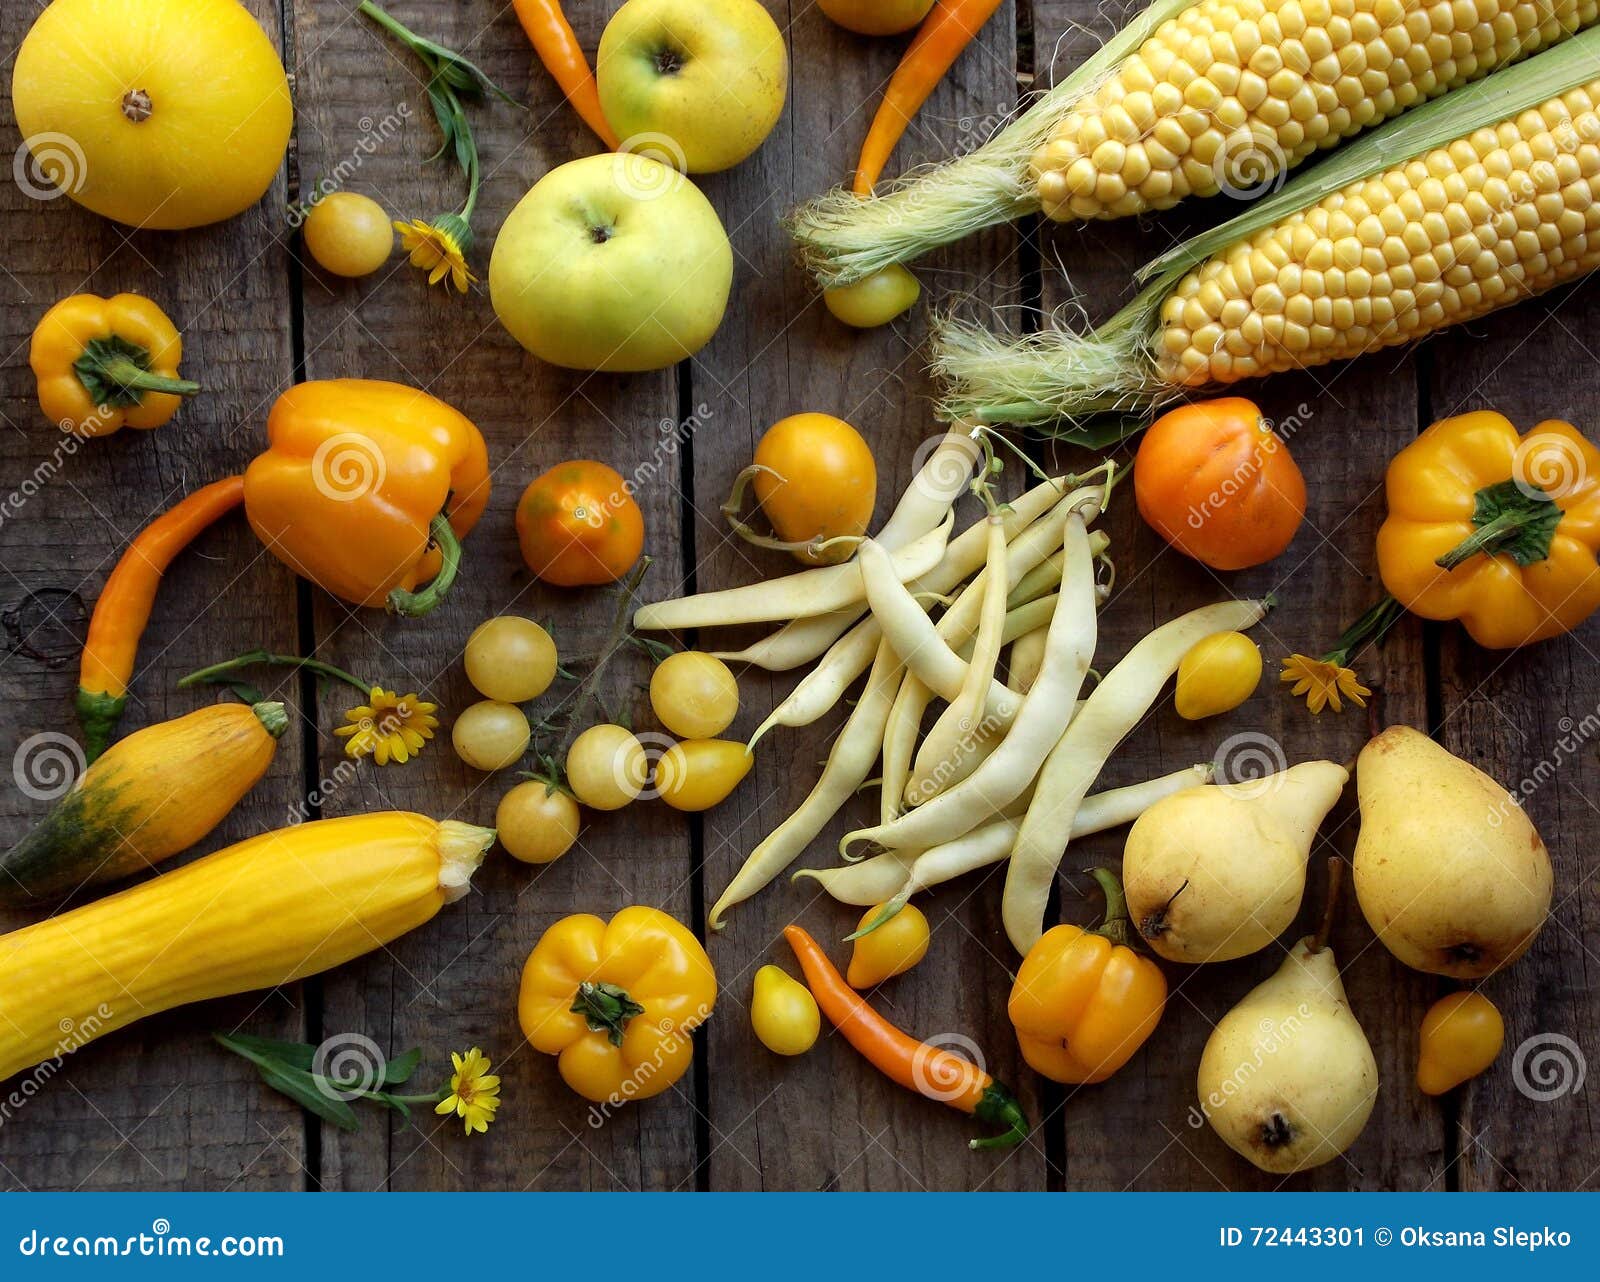 Yellow Fruits And Vegetables Stock Image - Image of zucchini, corn ...